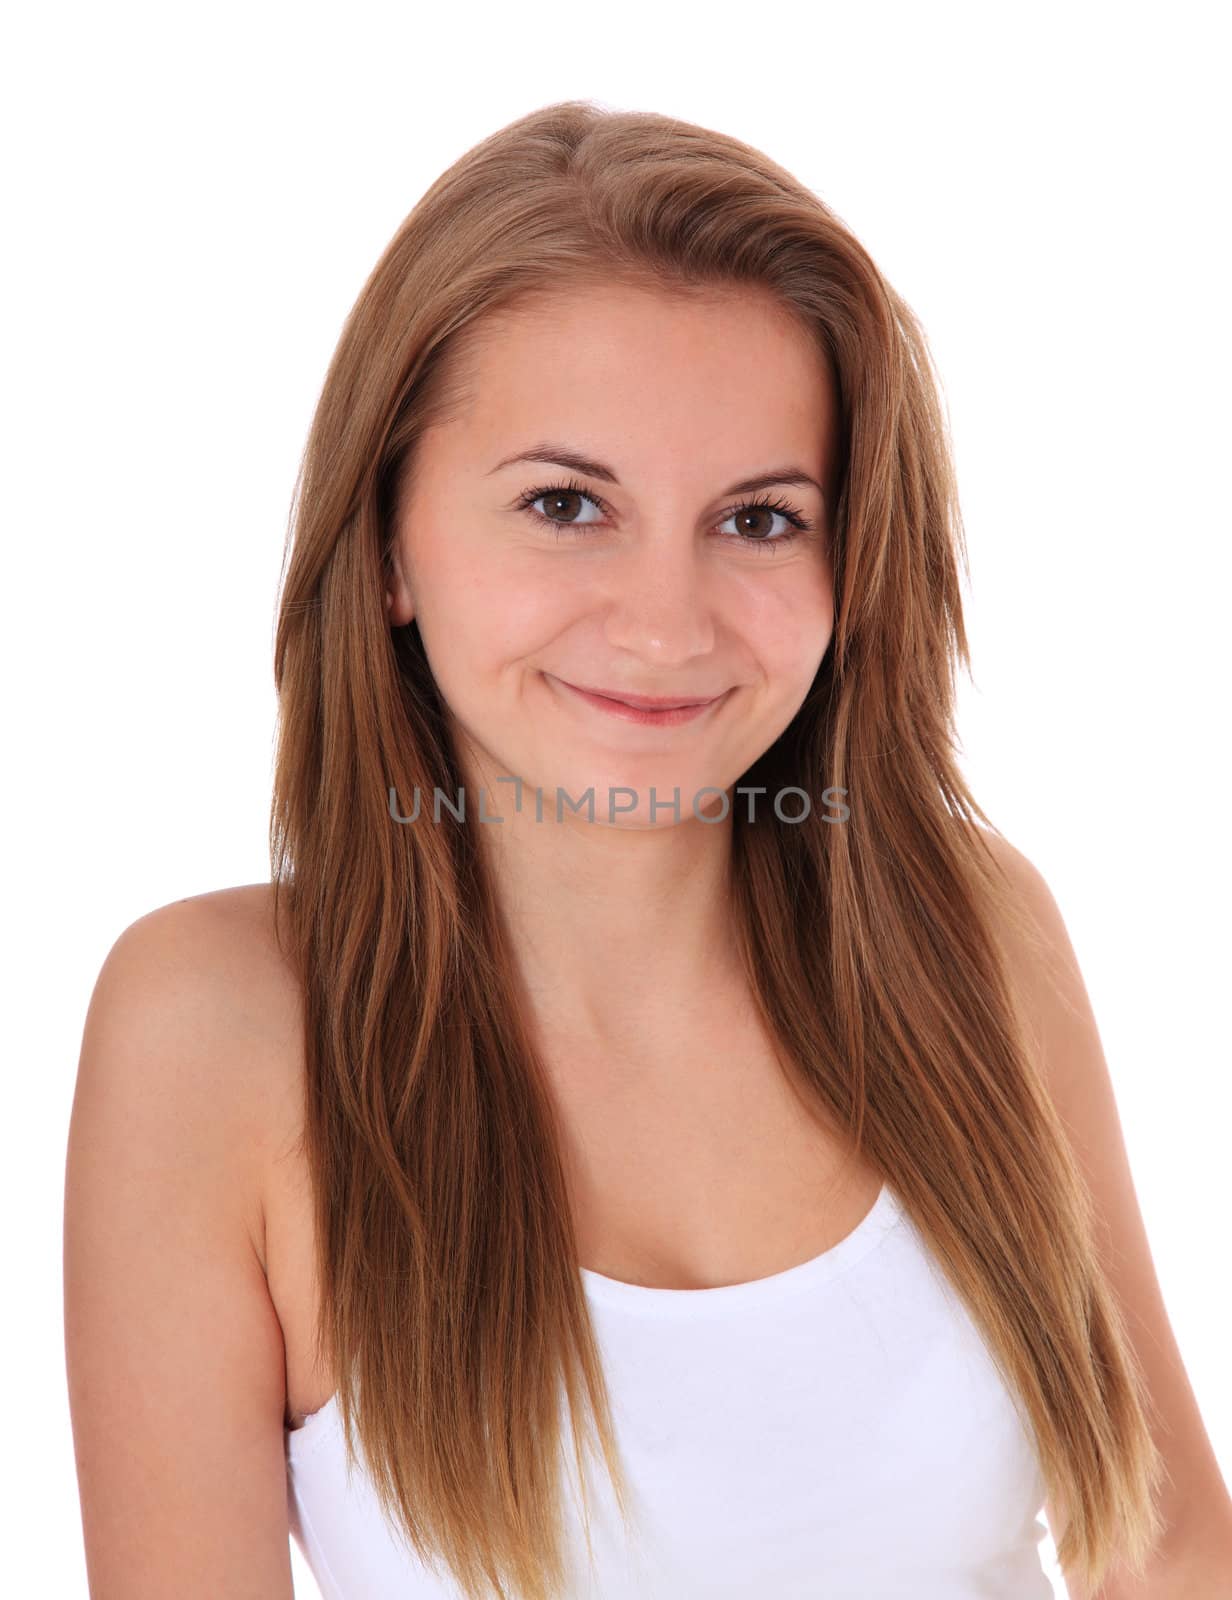 Attractive girl. All on white background.